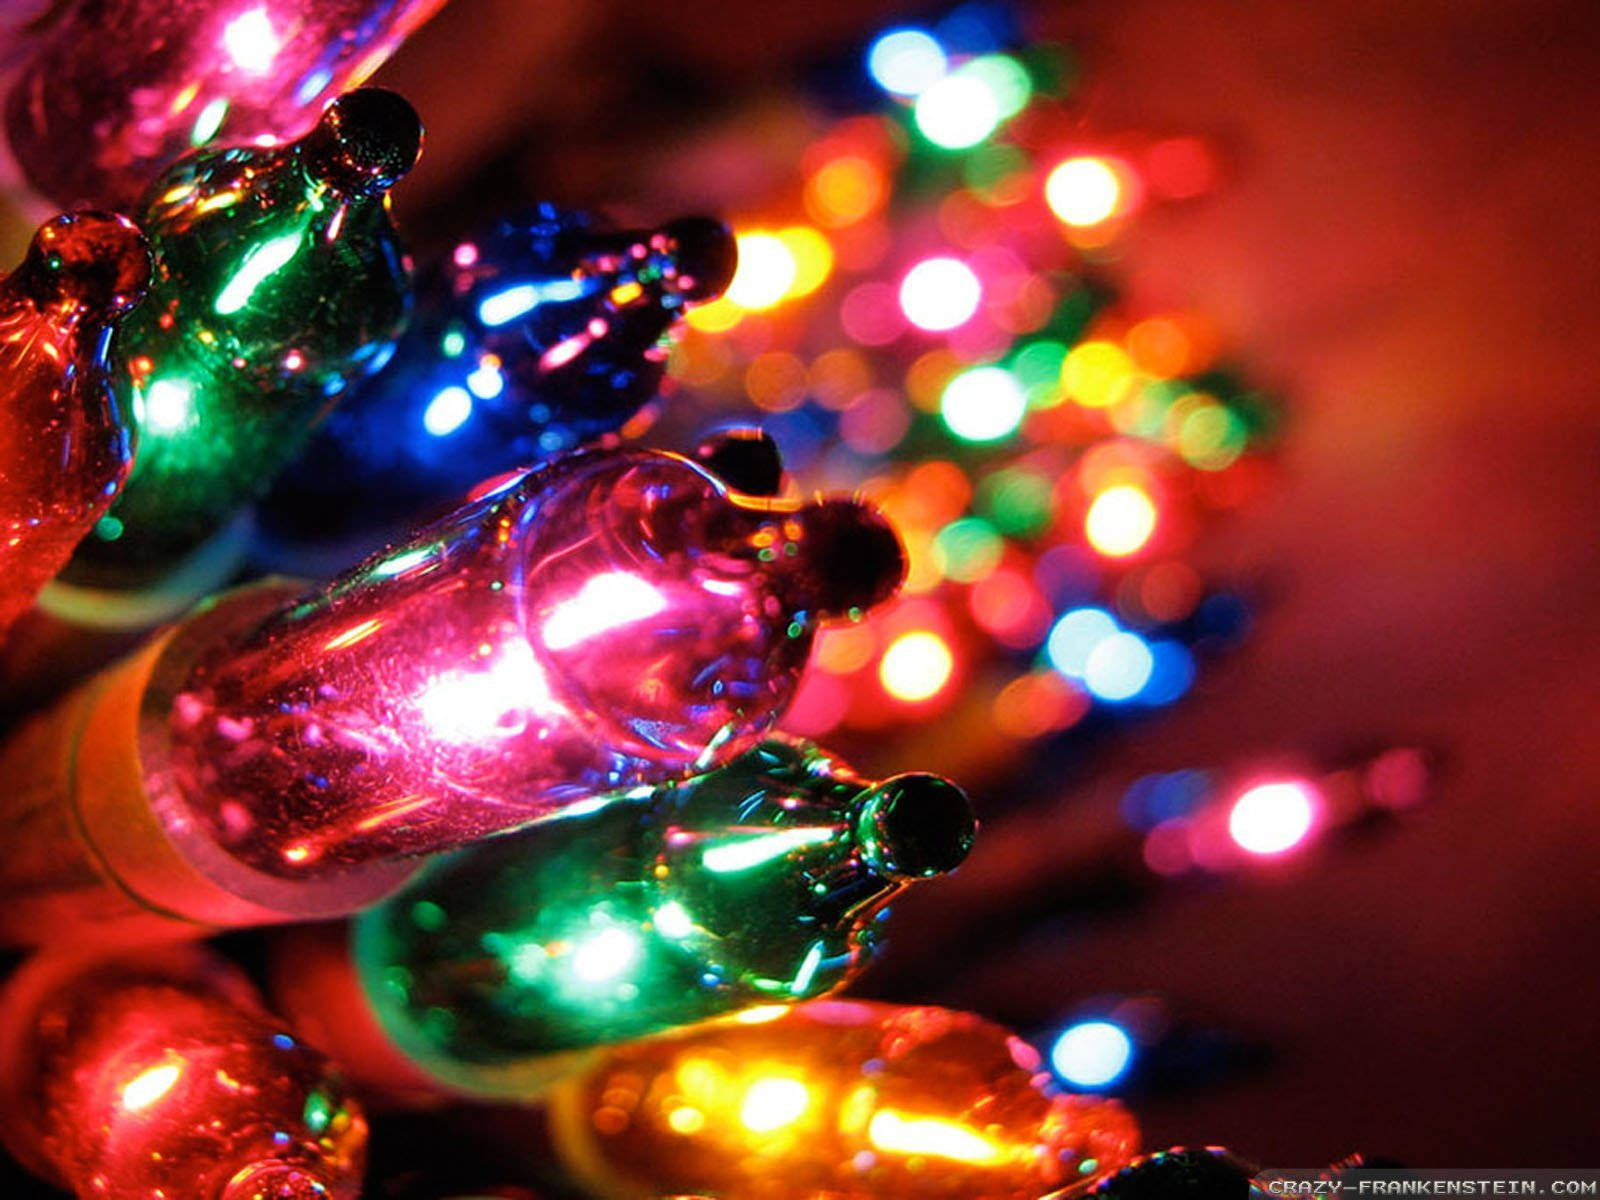 Cozy up with the magical lights of Christmas! Wallpaper